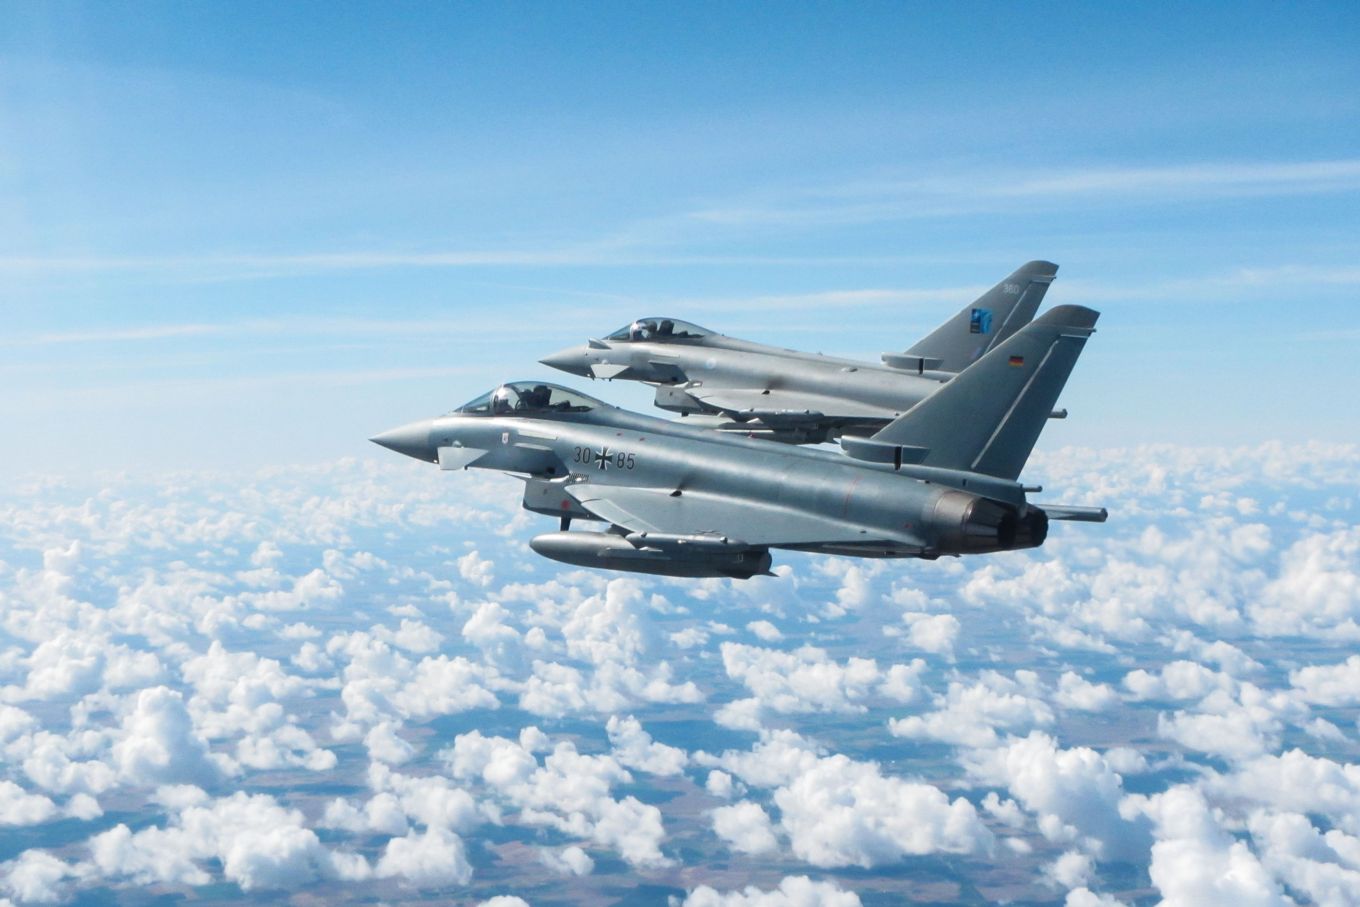 Image shows an RAF Typhoon flying above clouds next to a German Eurofighter aircraft.